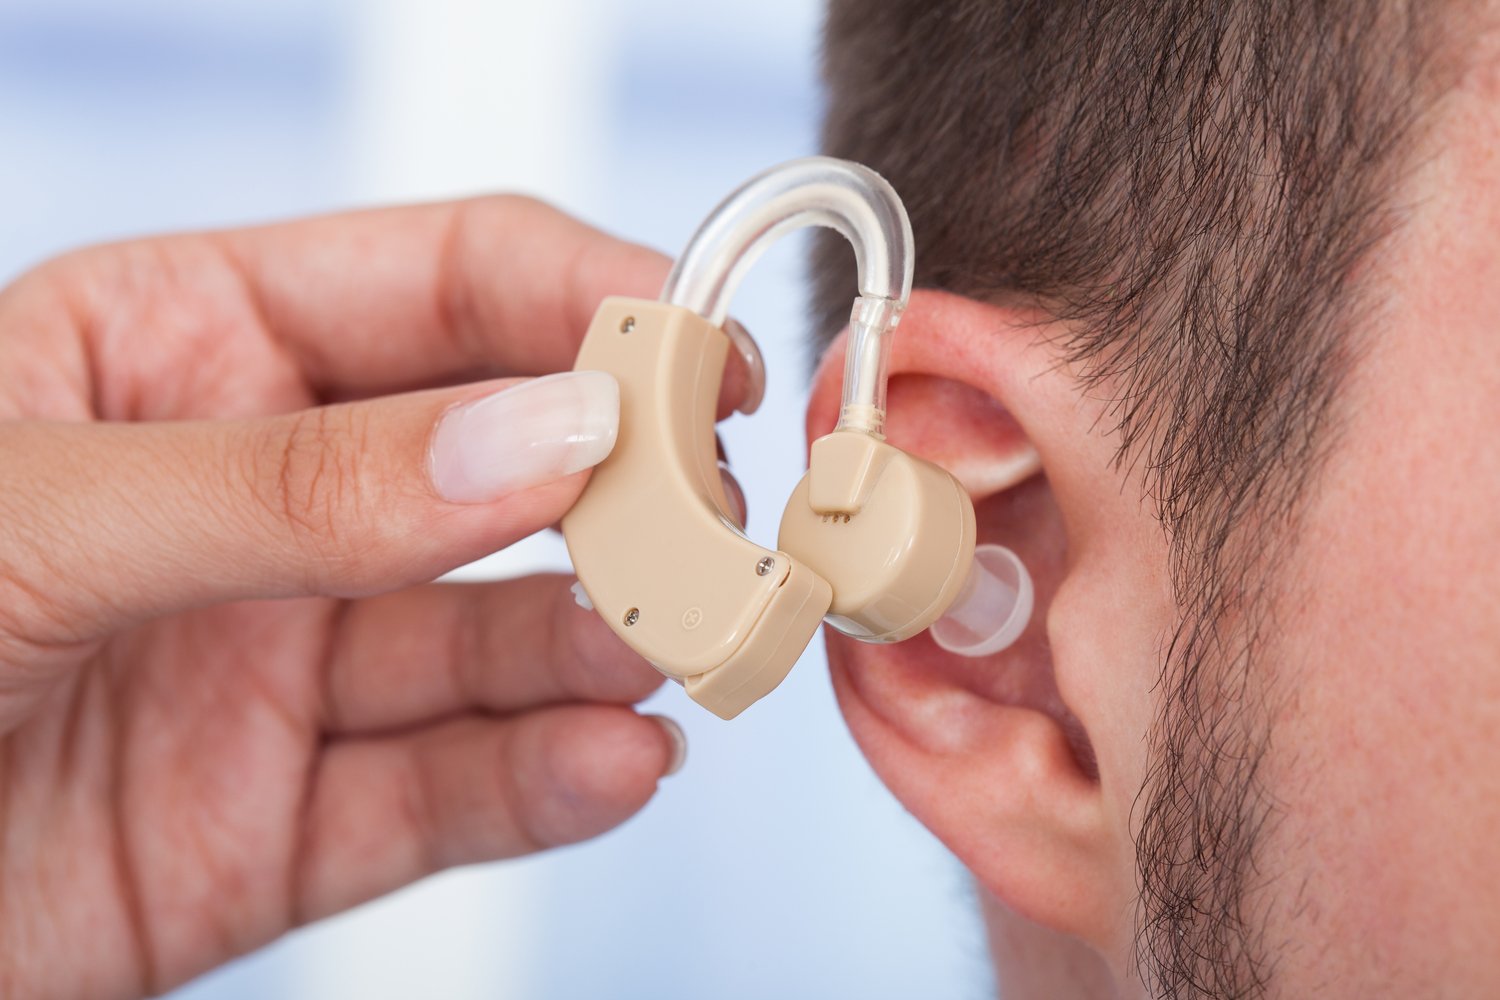 How To Get Medicare Cover For Hearing Aids